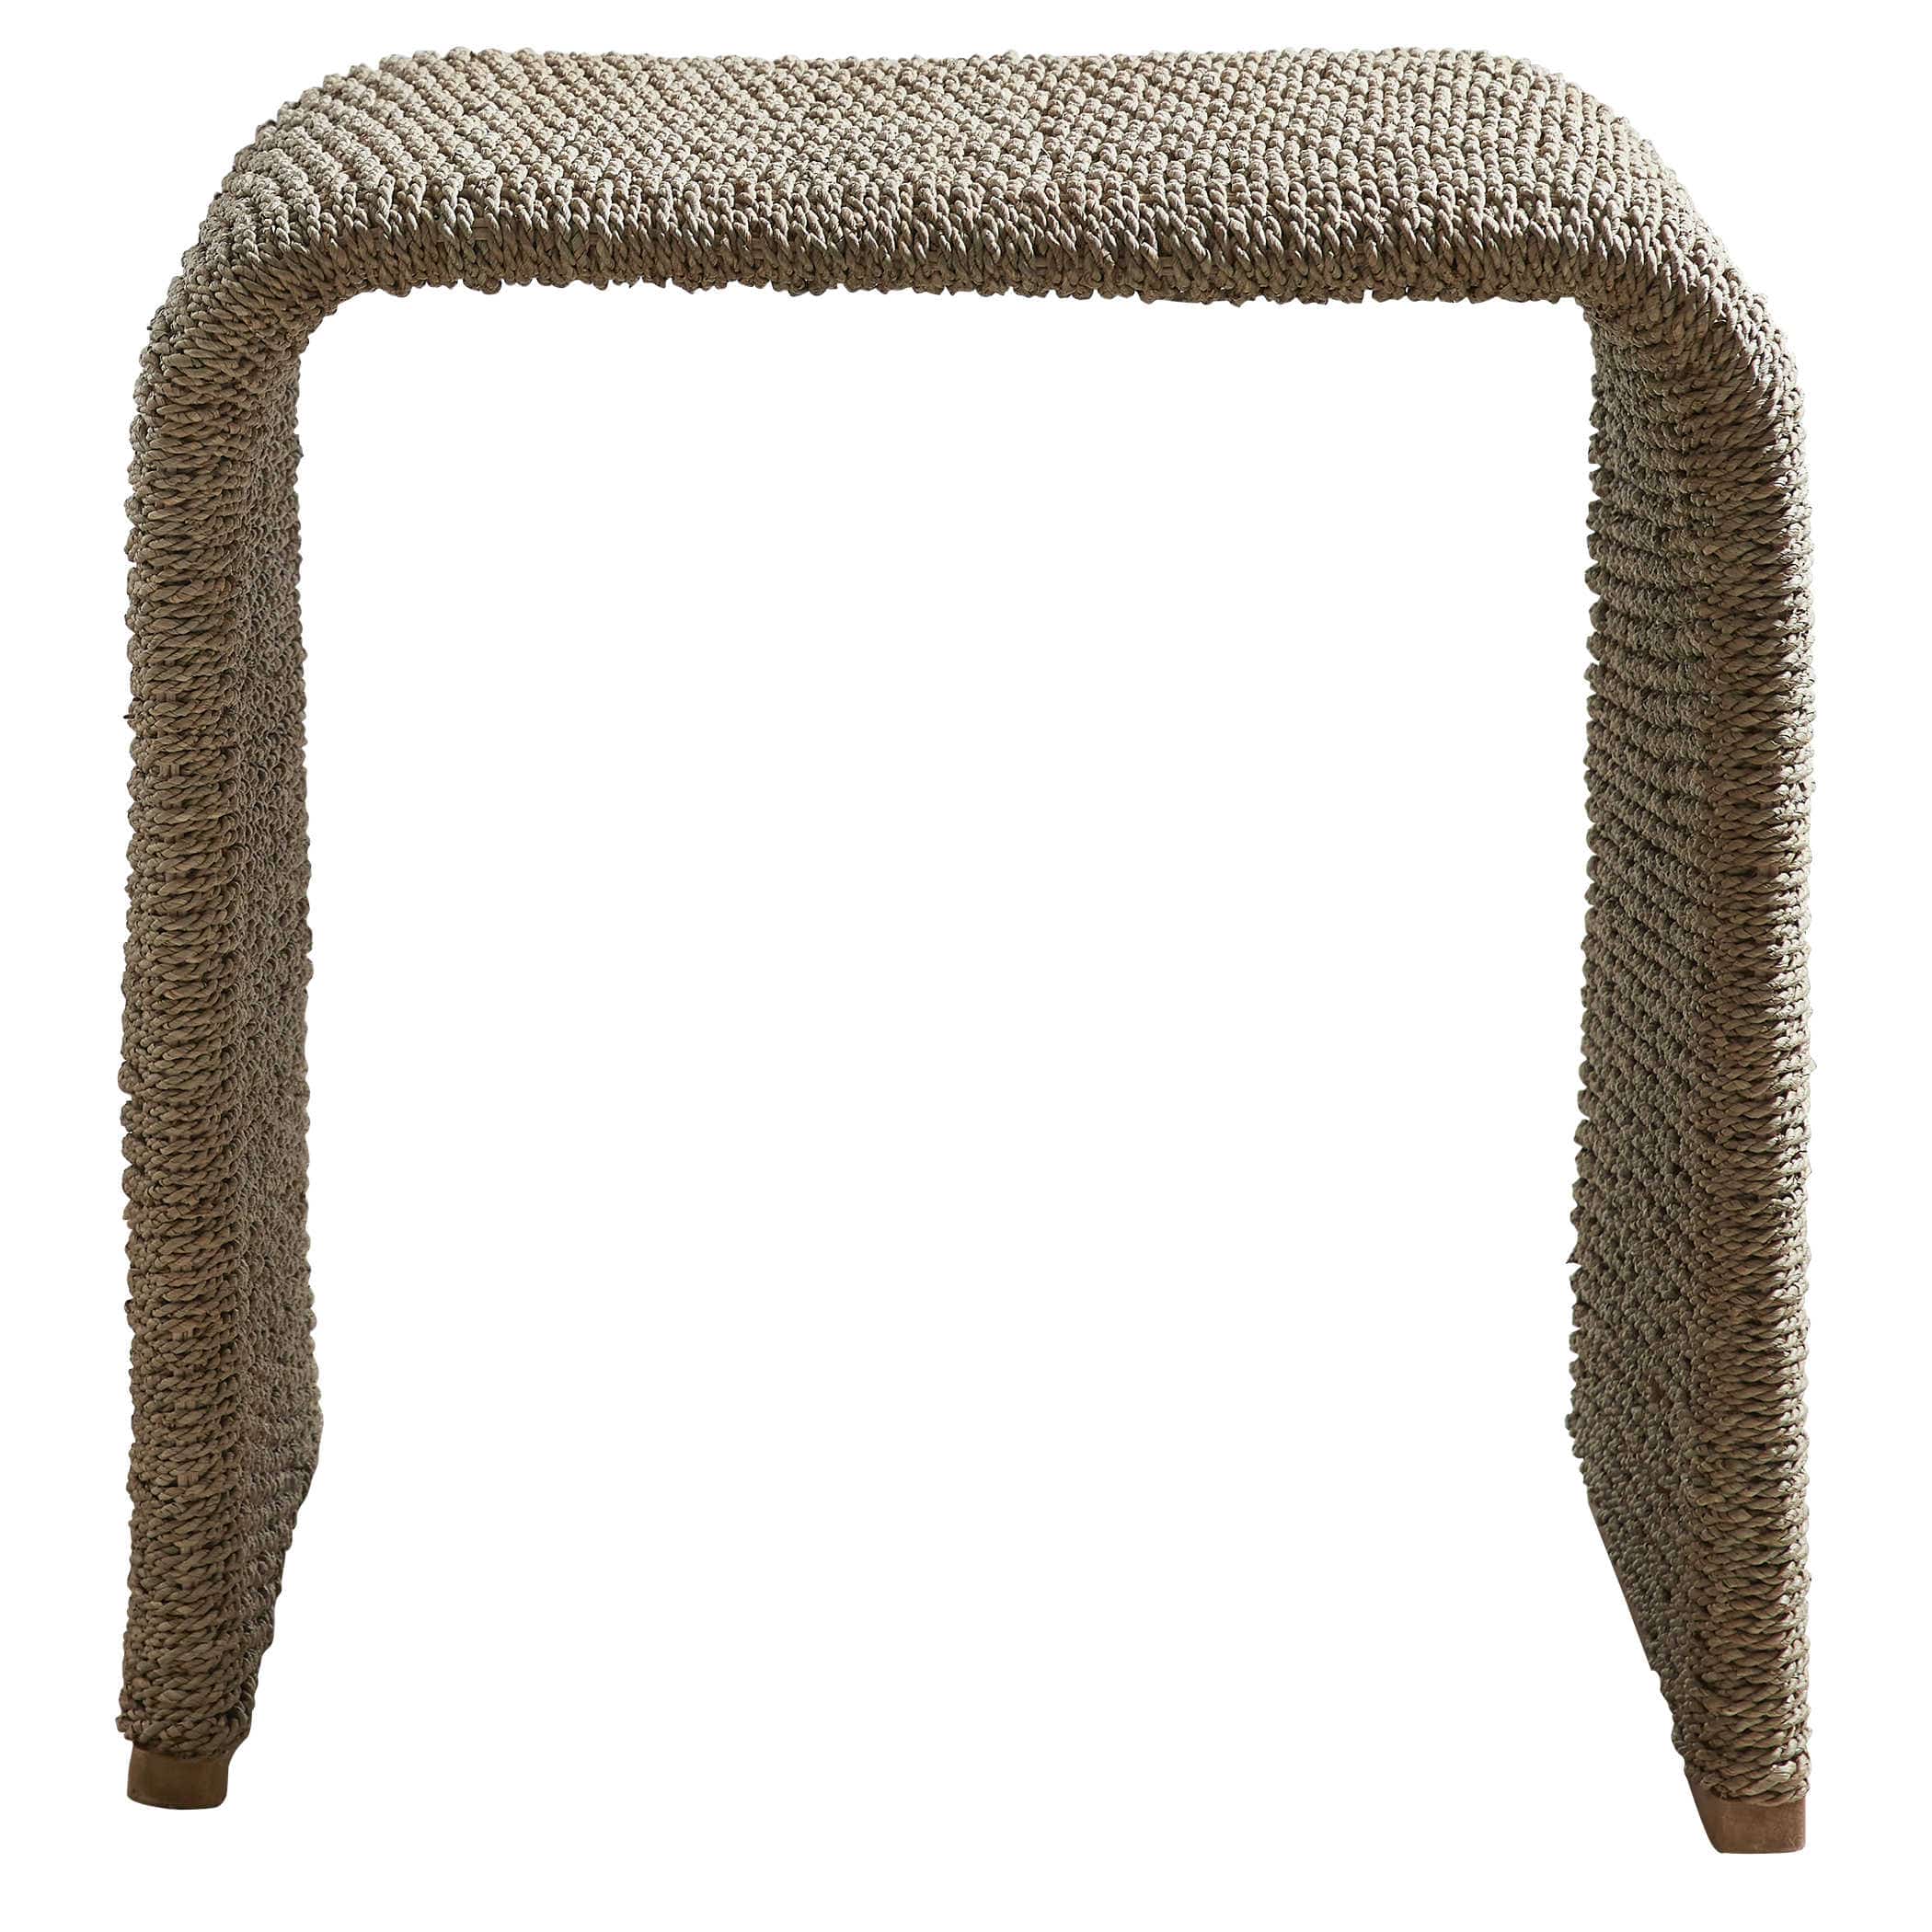 Calabria Woven Seagrass End Table Uttermost